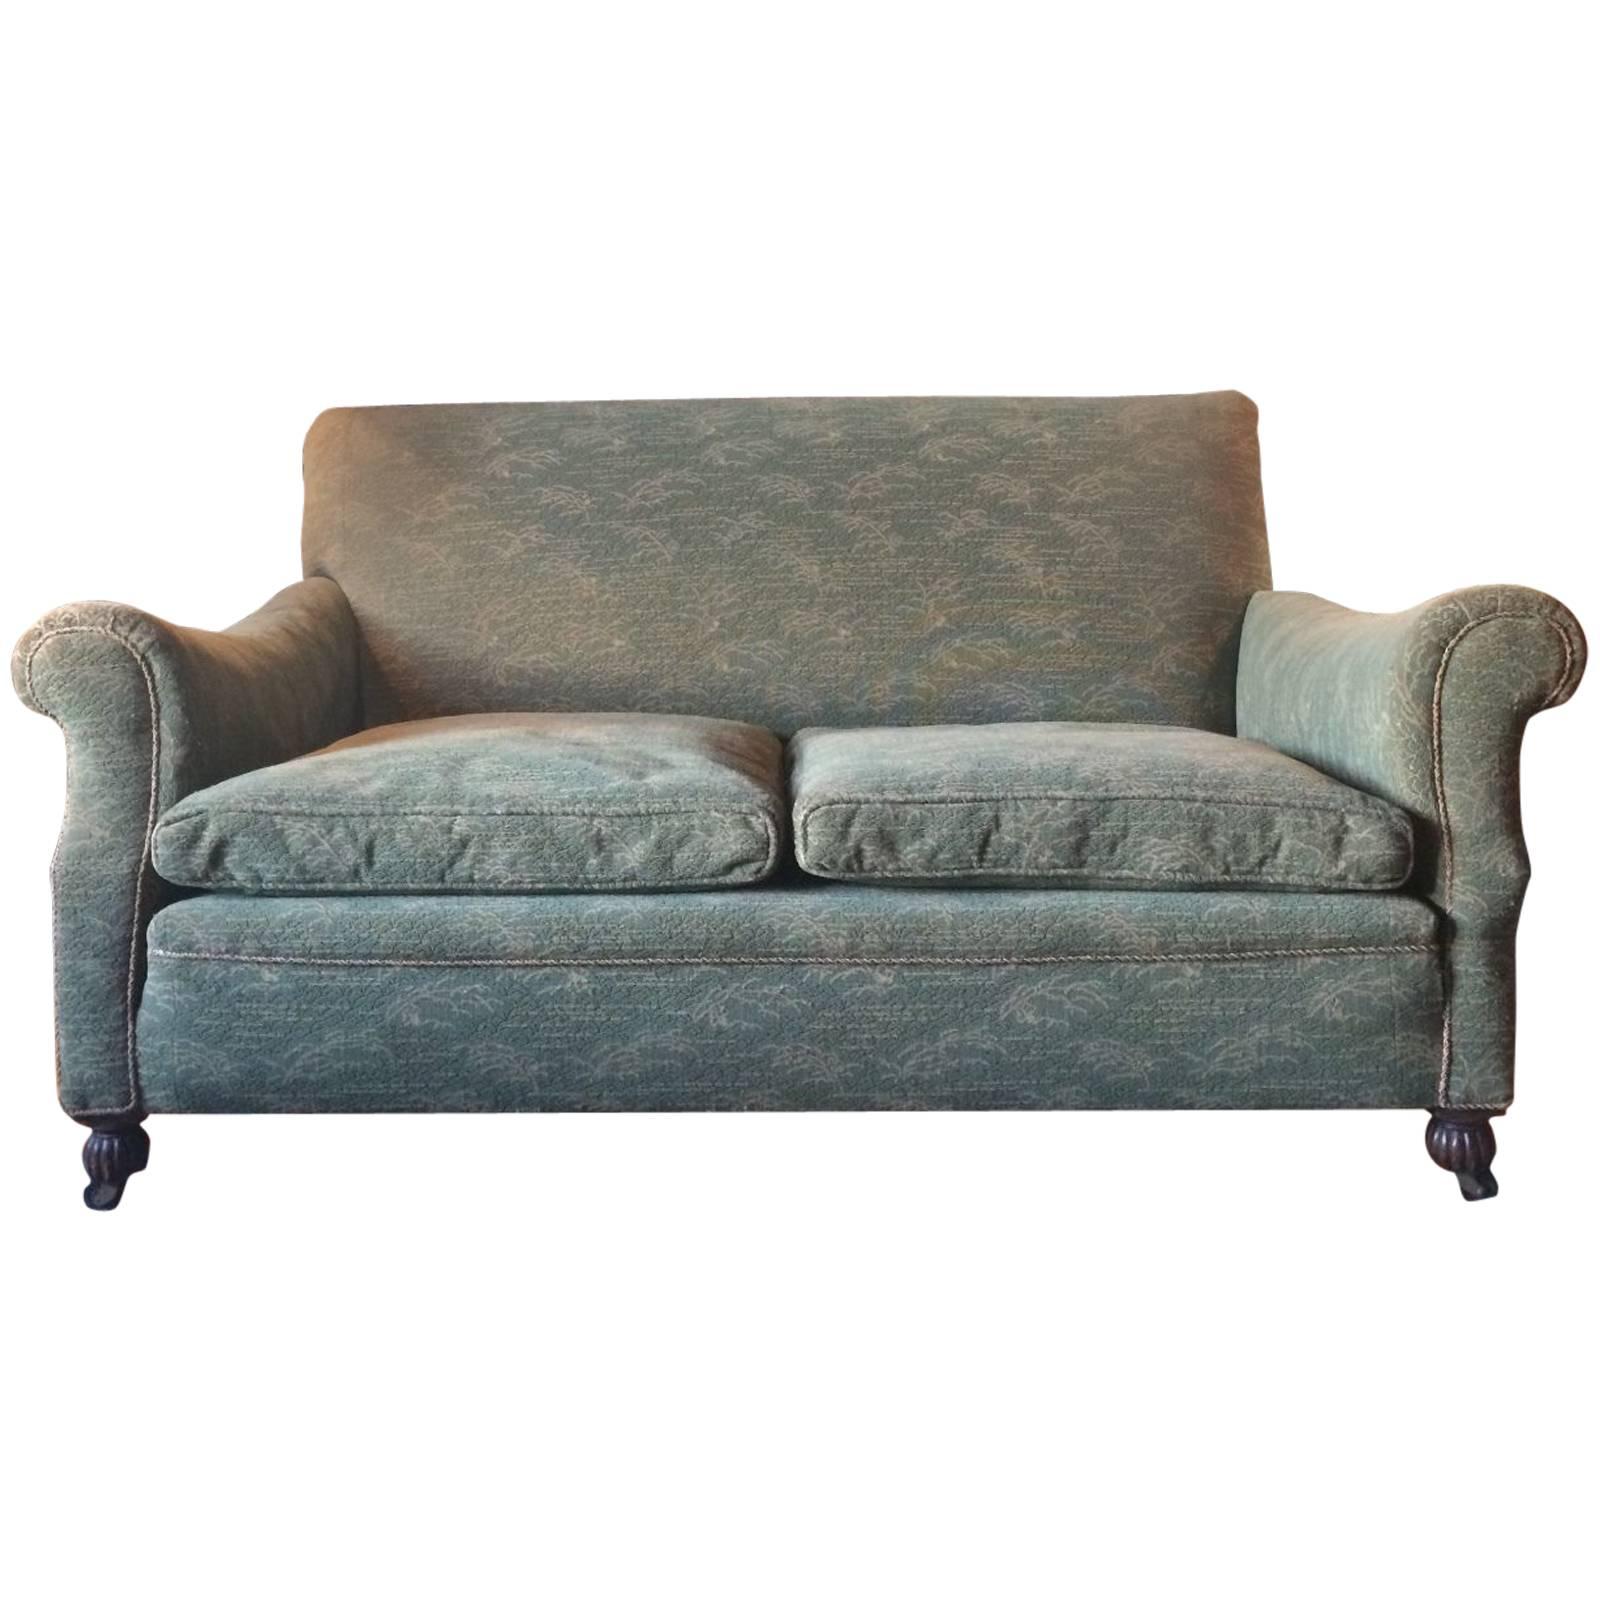 Antique Edwardian Drop End Sofa or Settee with Green Casters, Early 20th Century